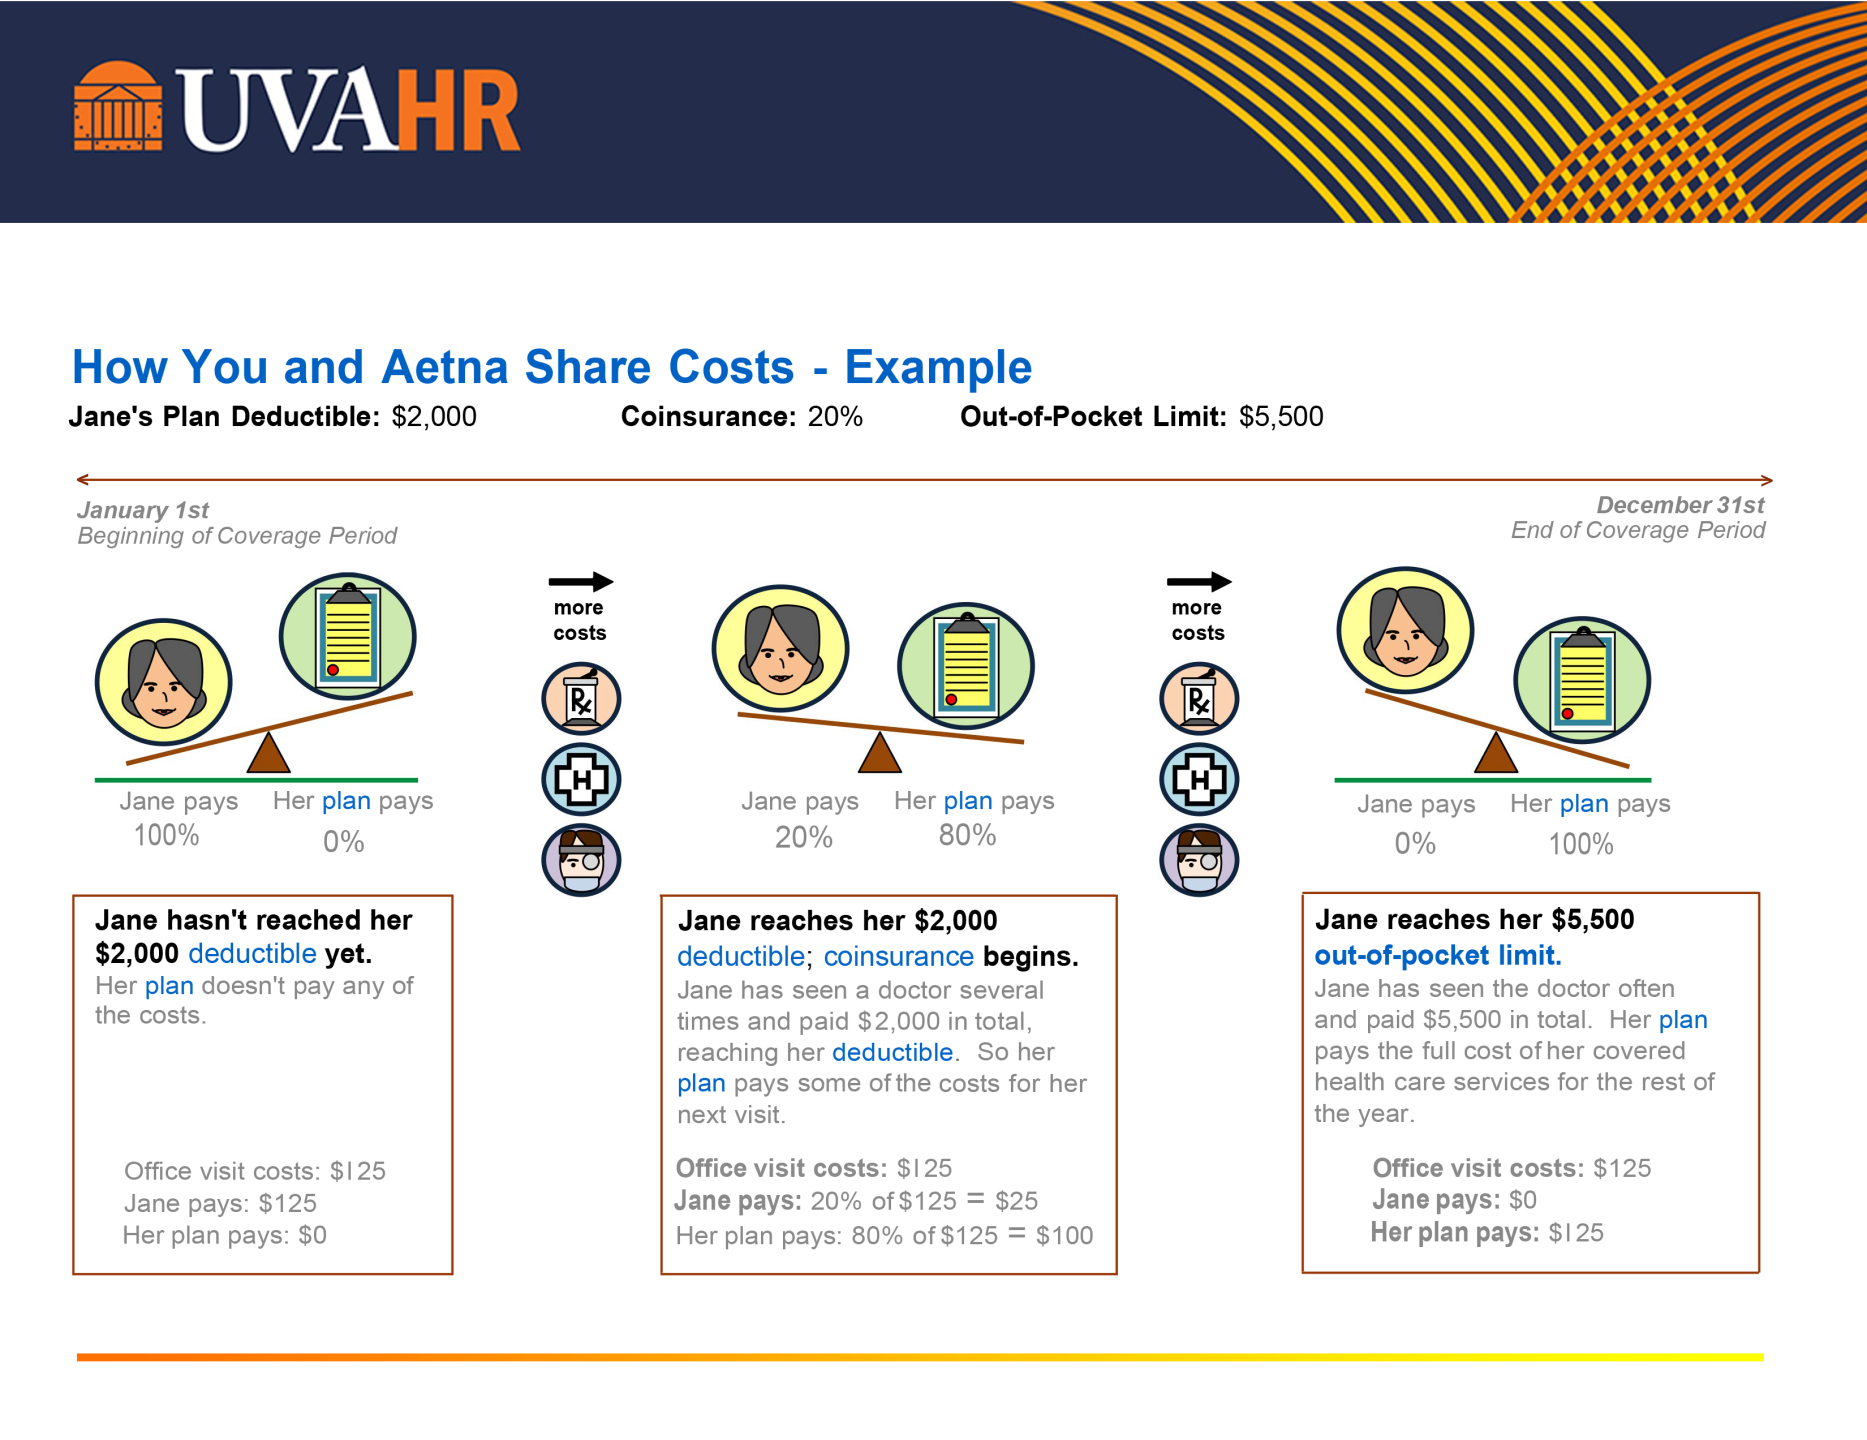 UVA Health Plan and how Aetna shares costs